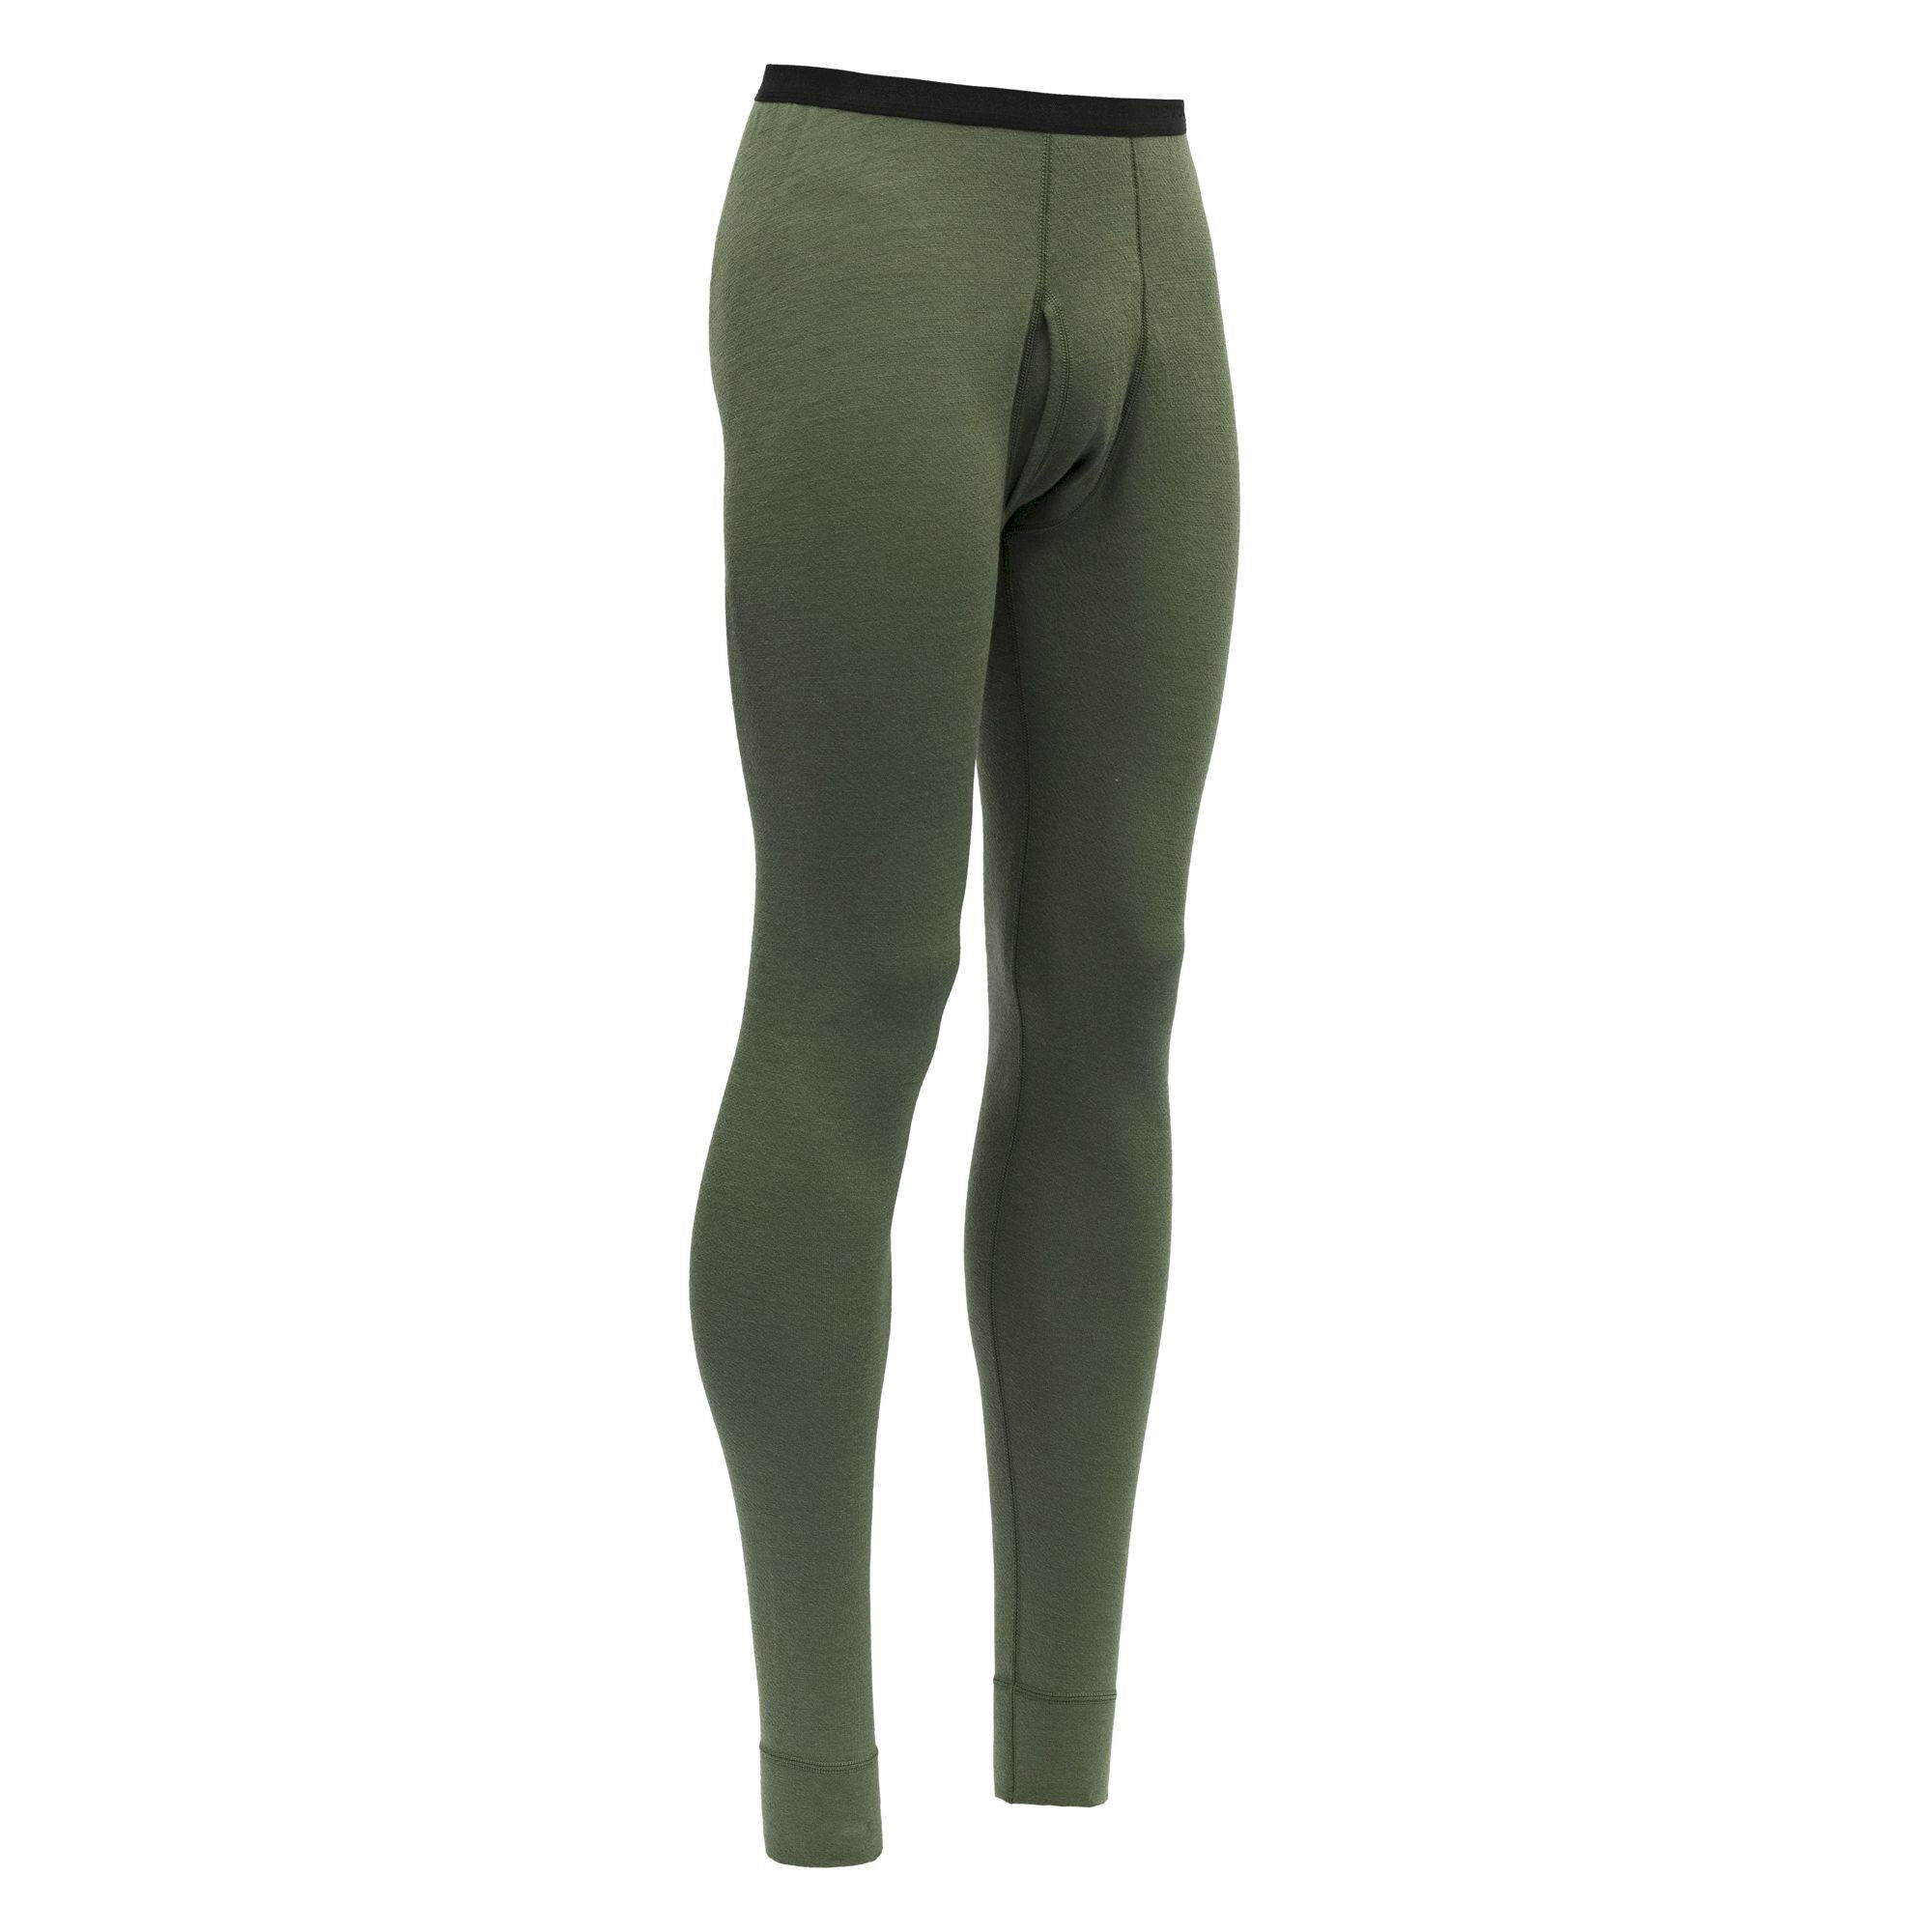 Devold Expedition Long Johns - Base layer - Men's